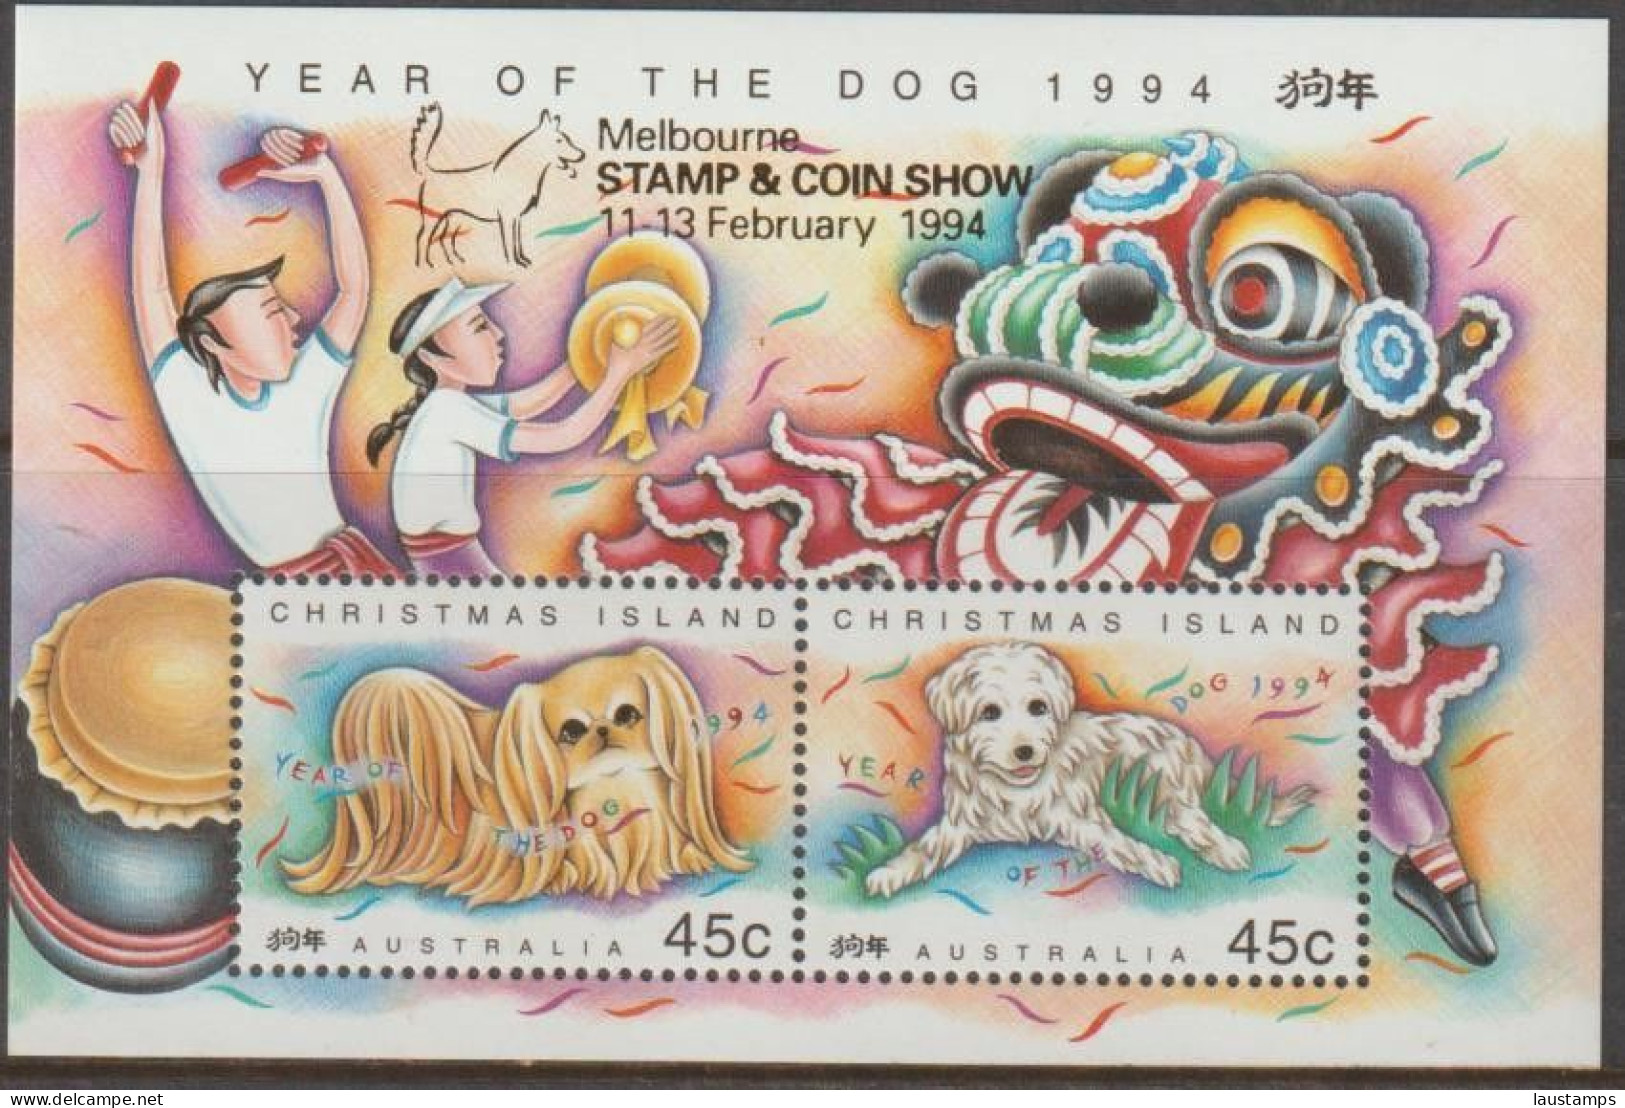 Christmas Island 1994 Year Of The Dog Ovpt Melbourne Stamp & Coin Show S/S MNH - Chinese New Year